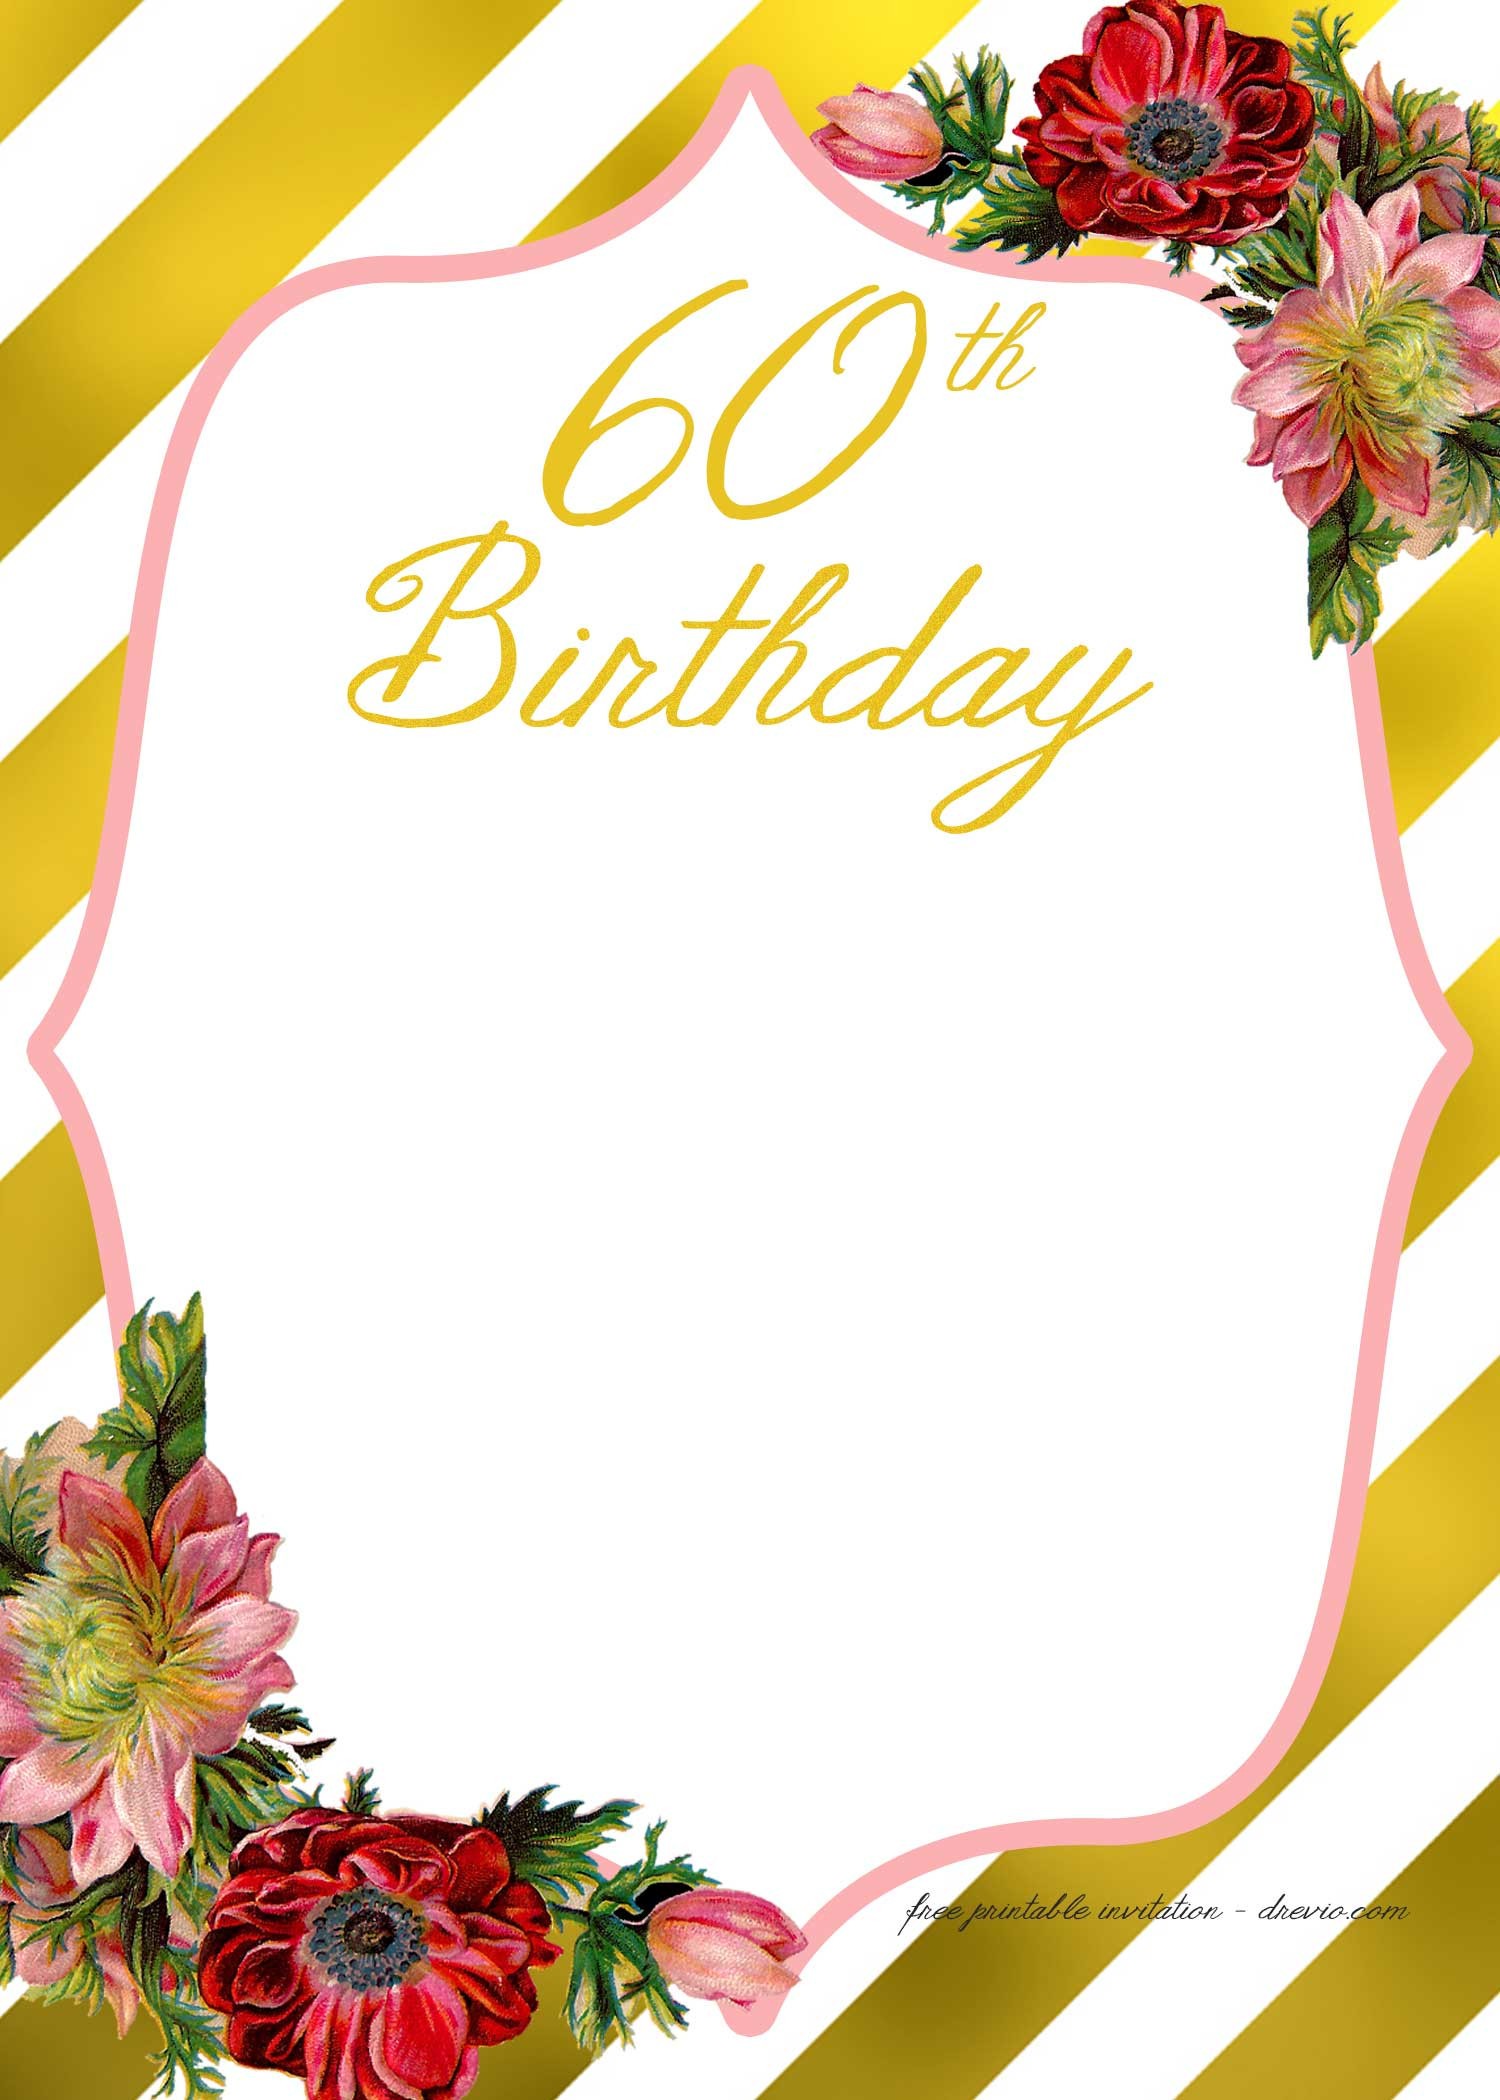 Free Birthday Invitation Template
 Adult Birthday Invitations Template for 50th years old